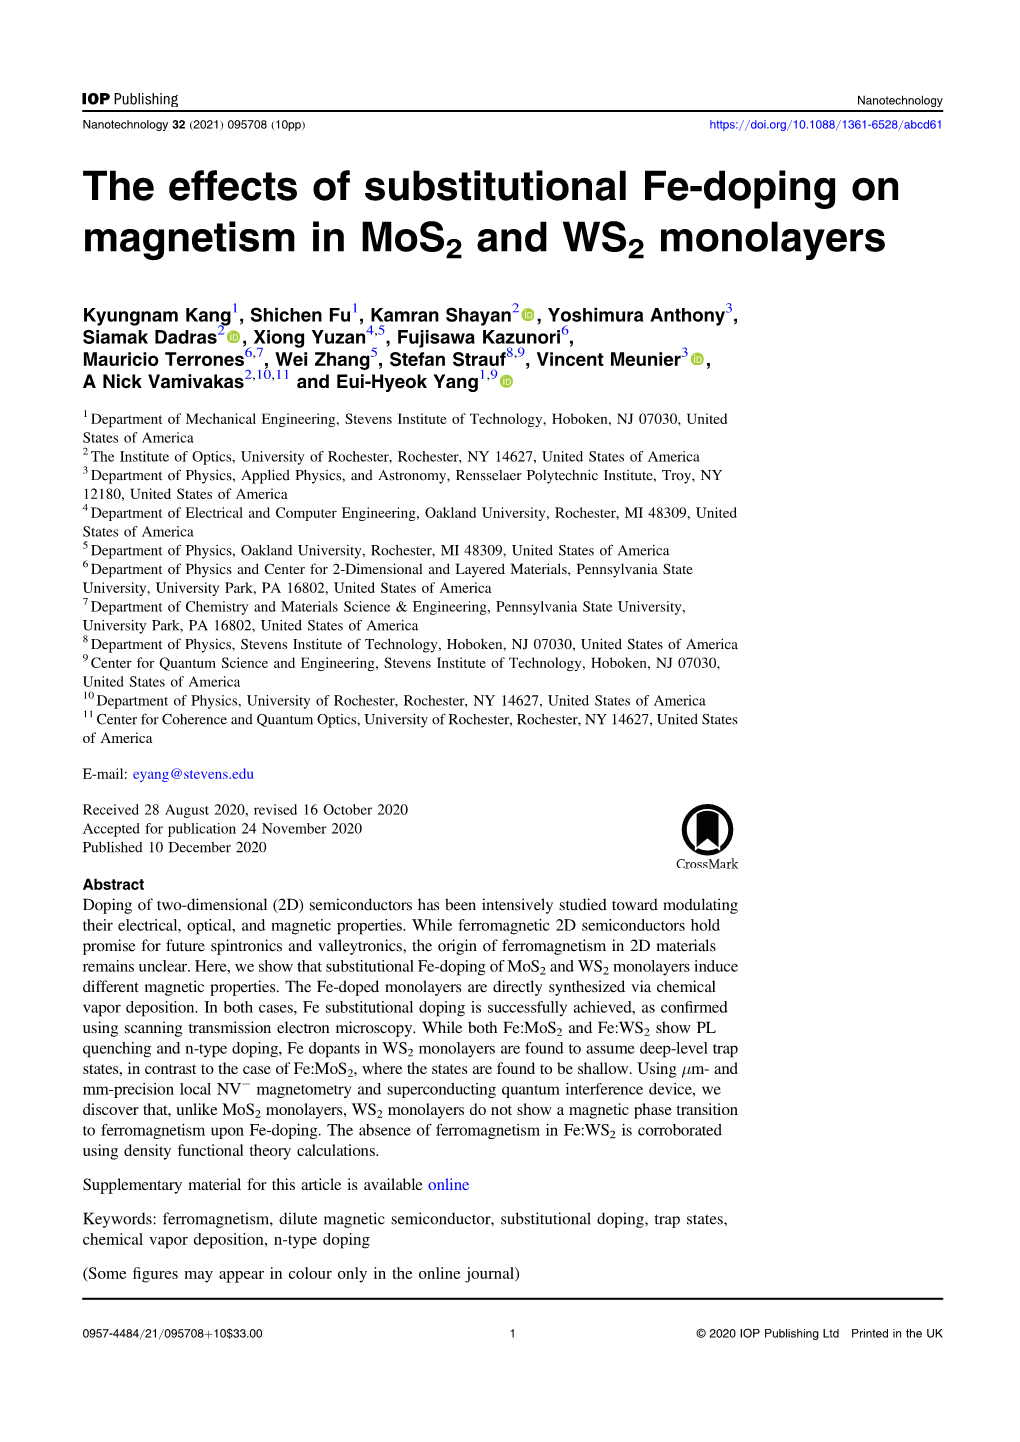 The Effects of Substitutional Fe-Doping on Magnetism in Mos2 and WS2 Monolayers